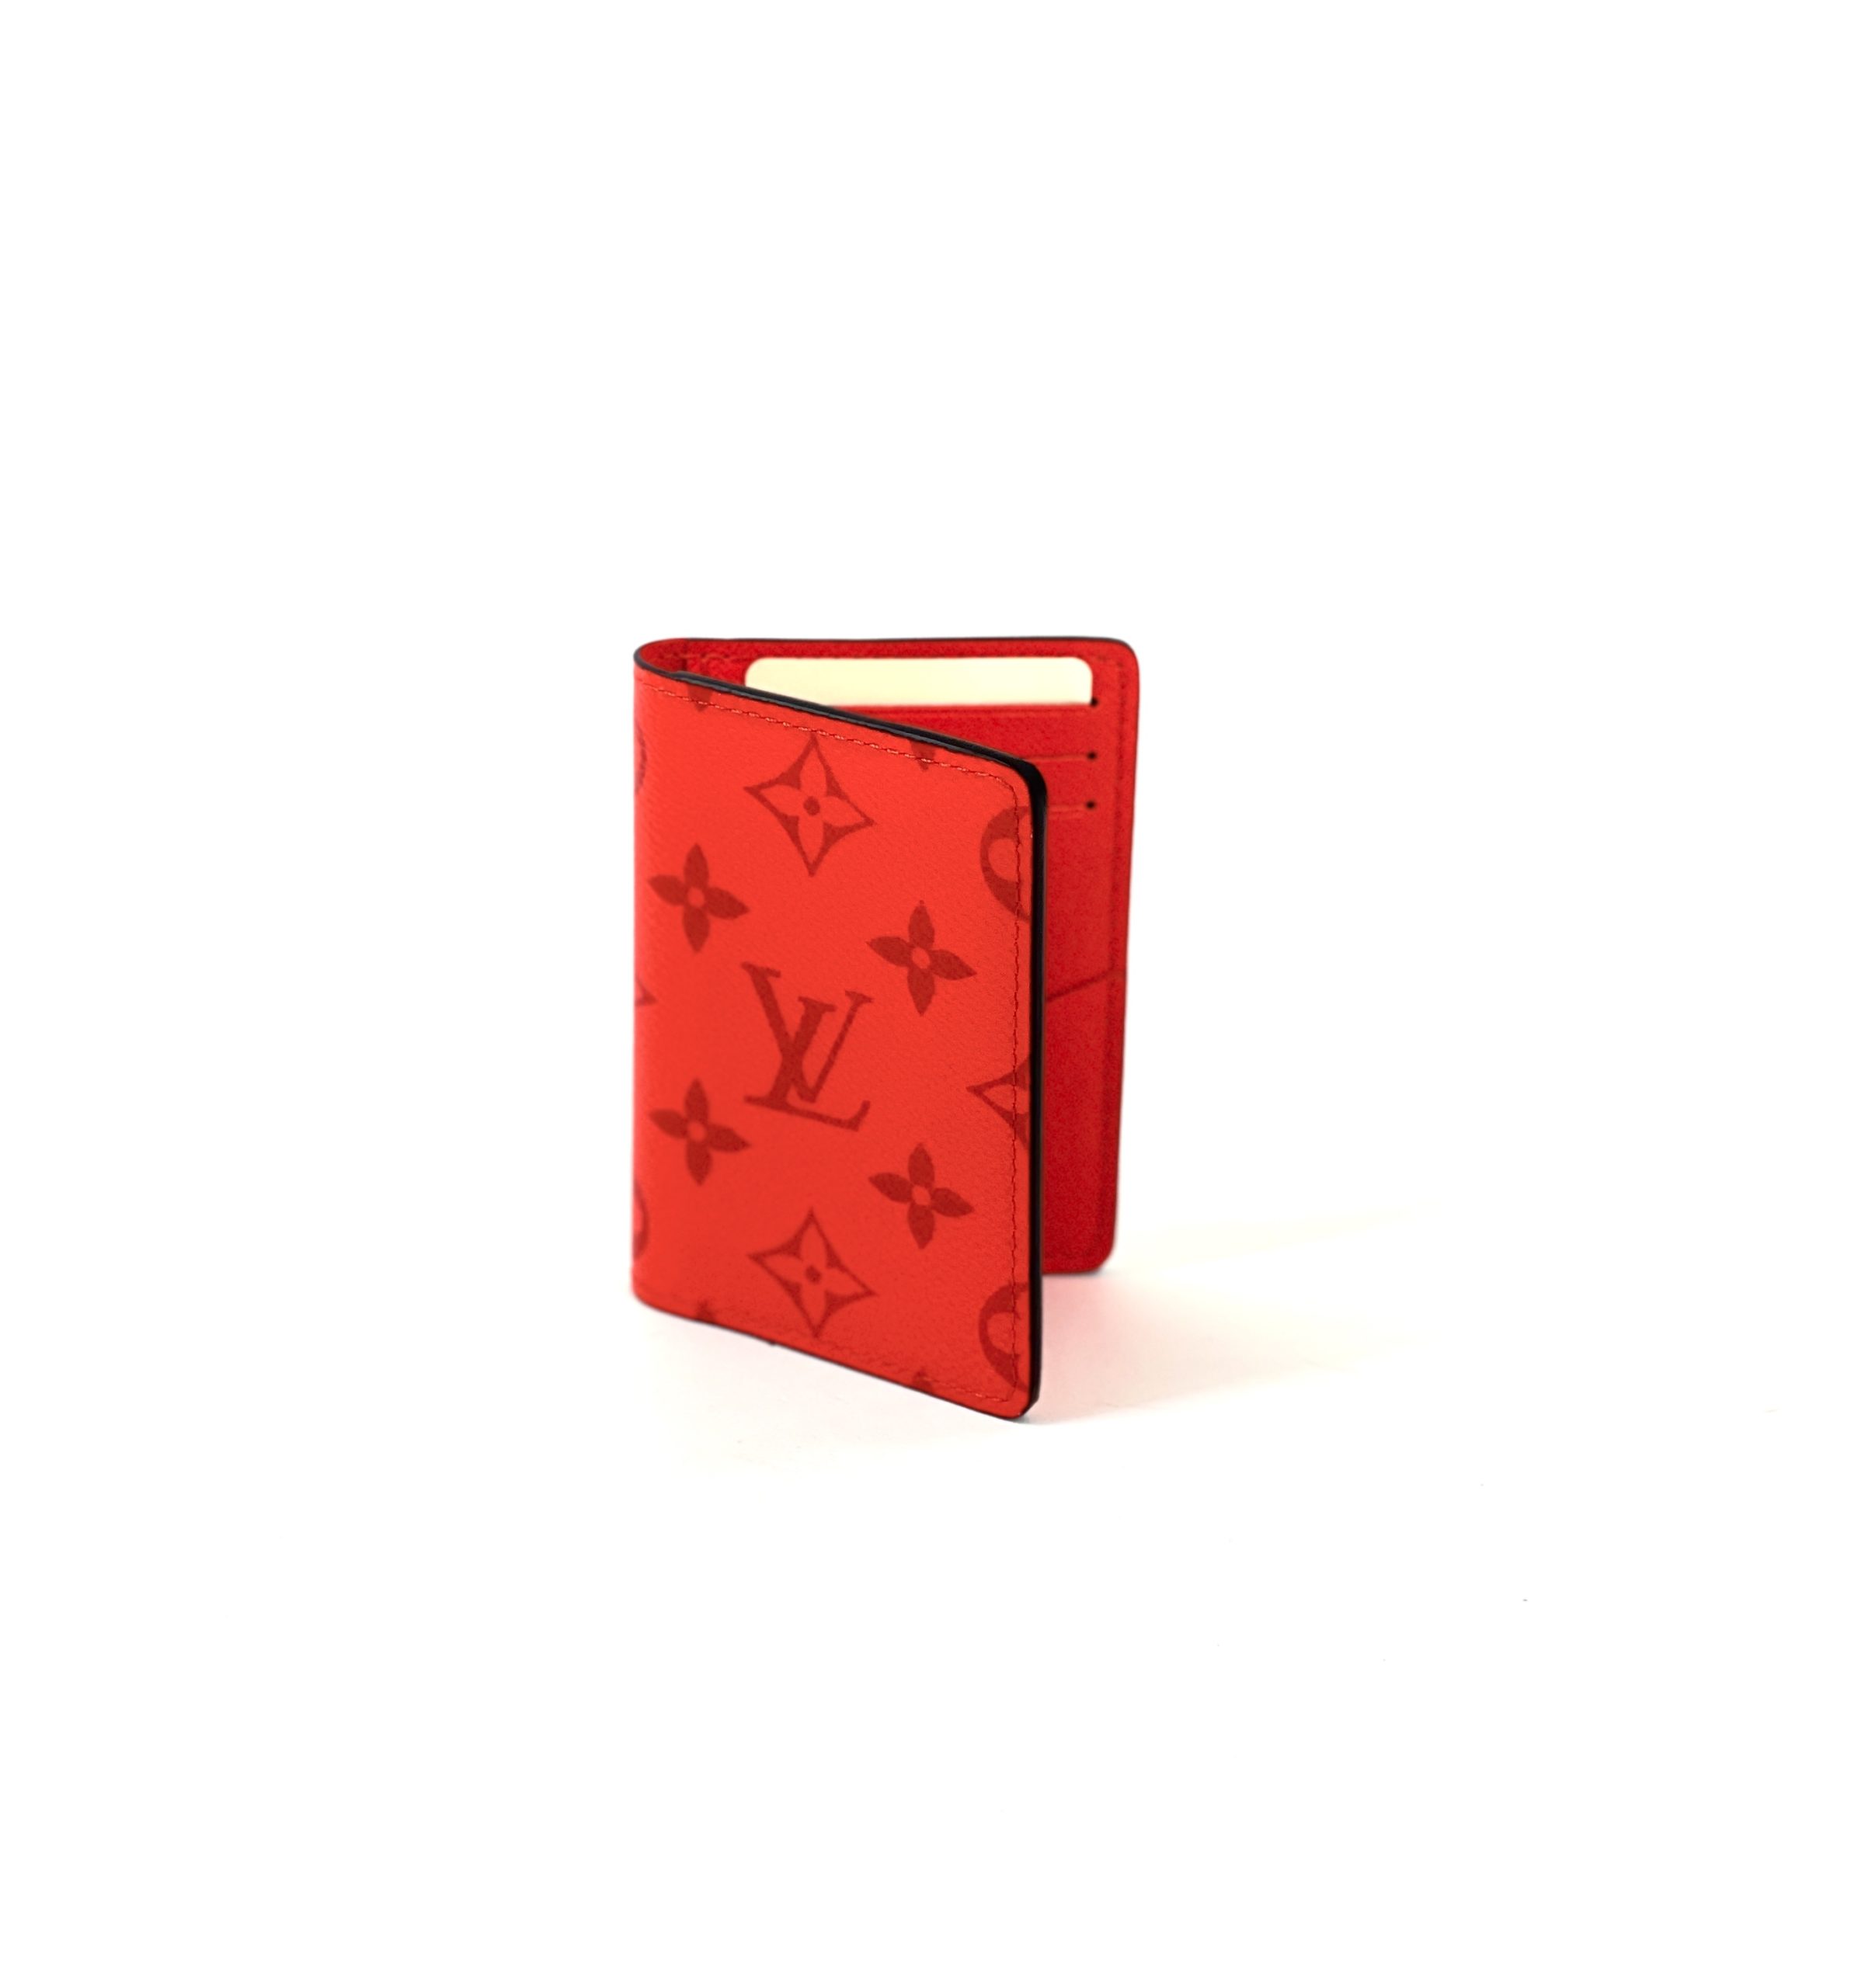 Louis Vuitton Card Holders (M30837, M30823) in 2023